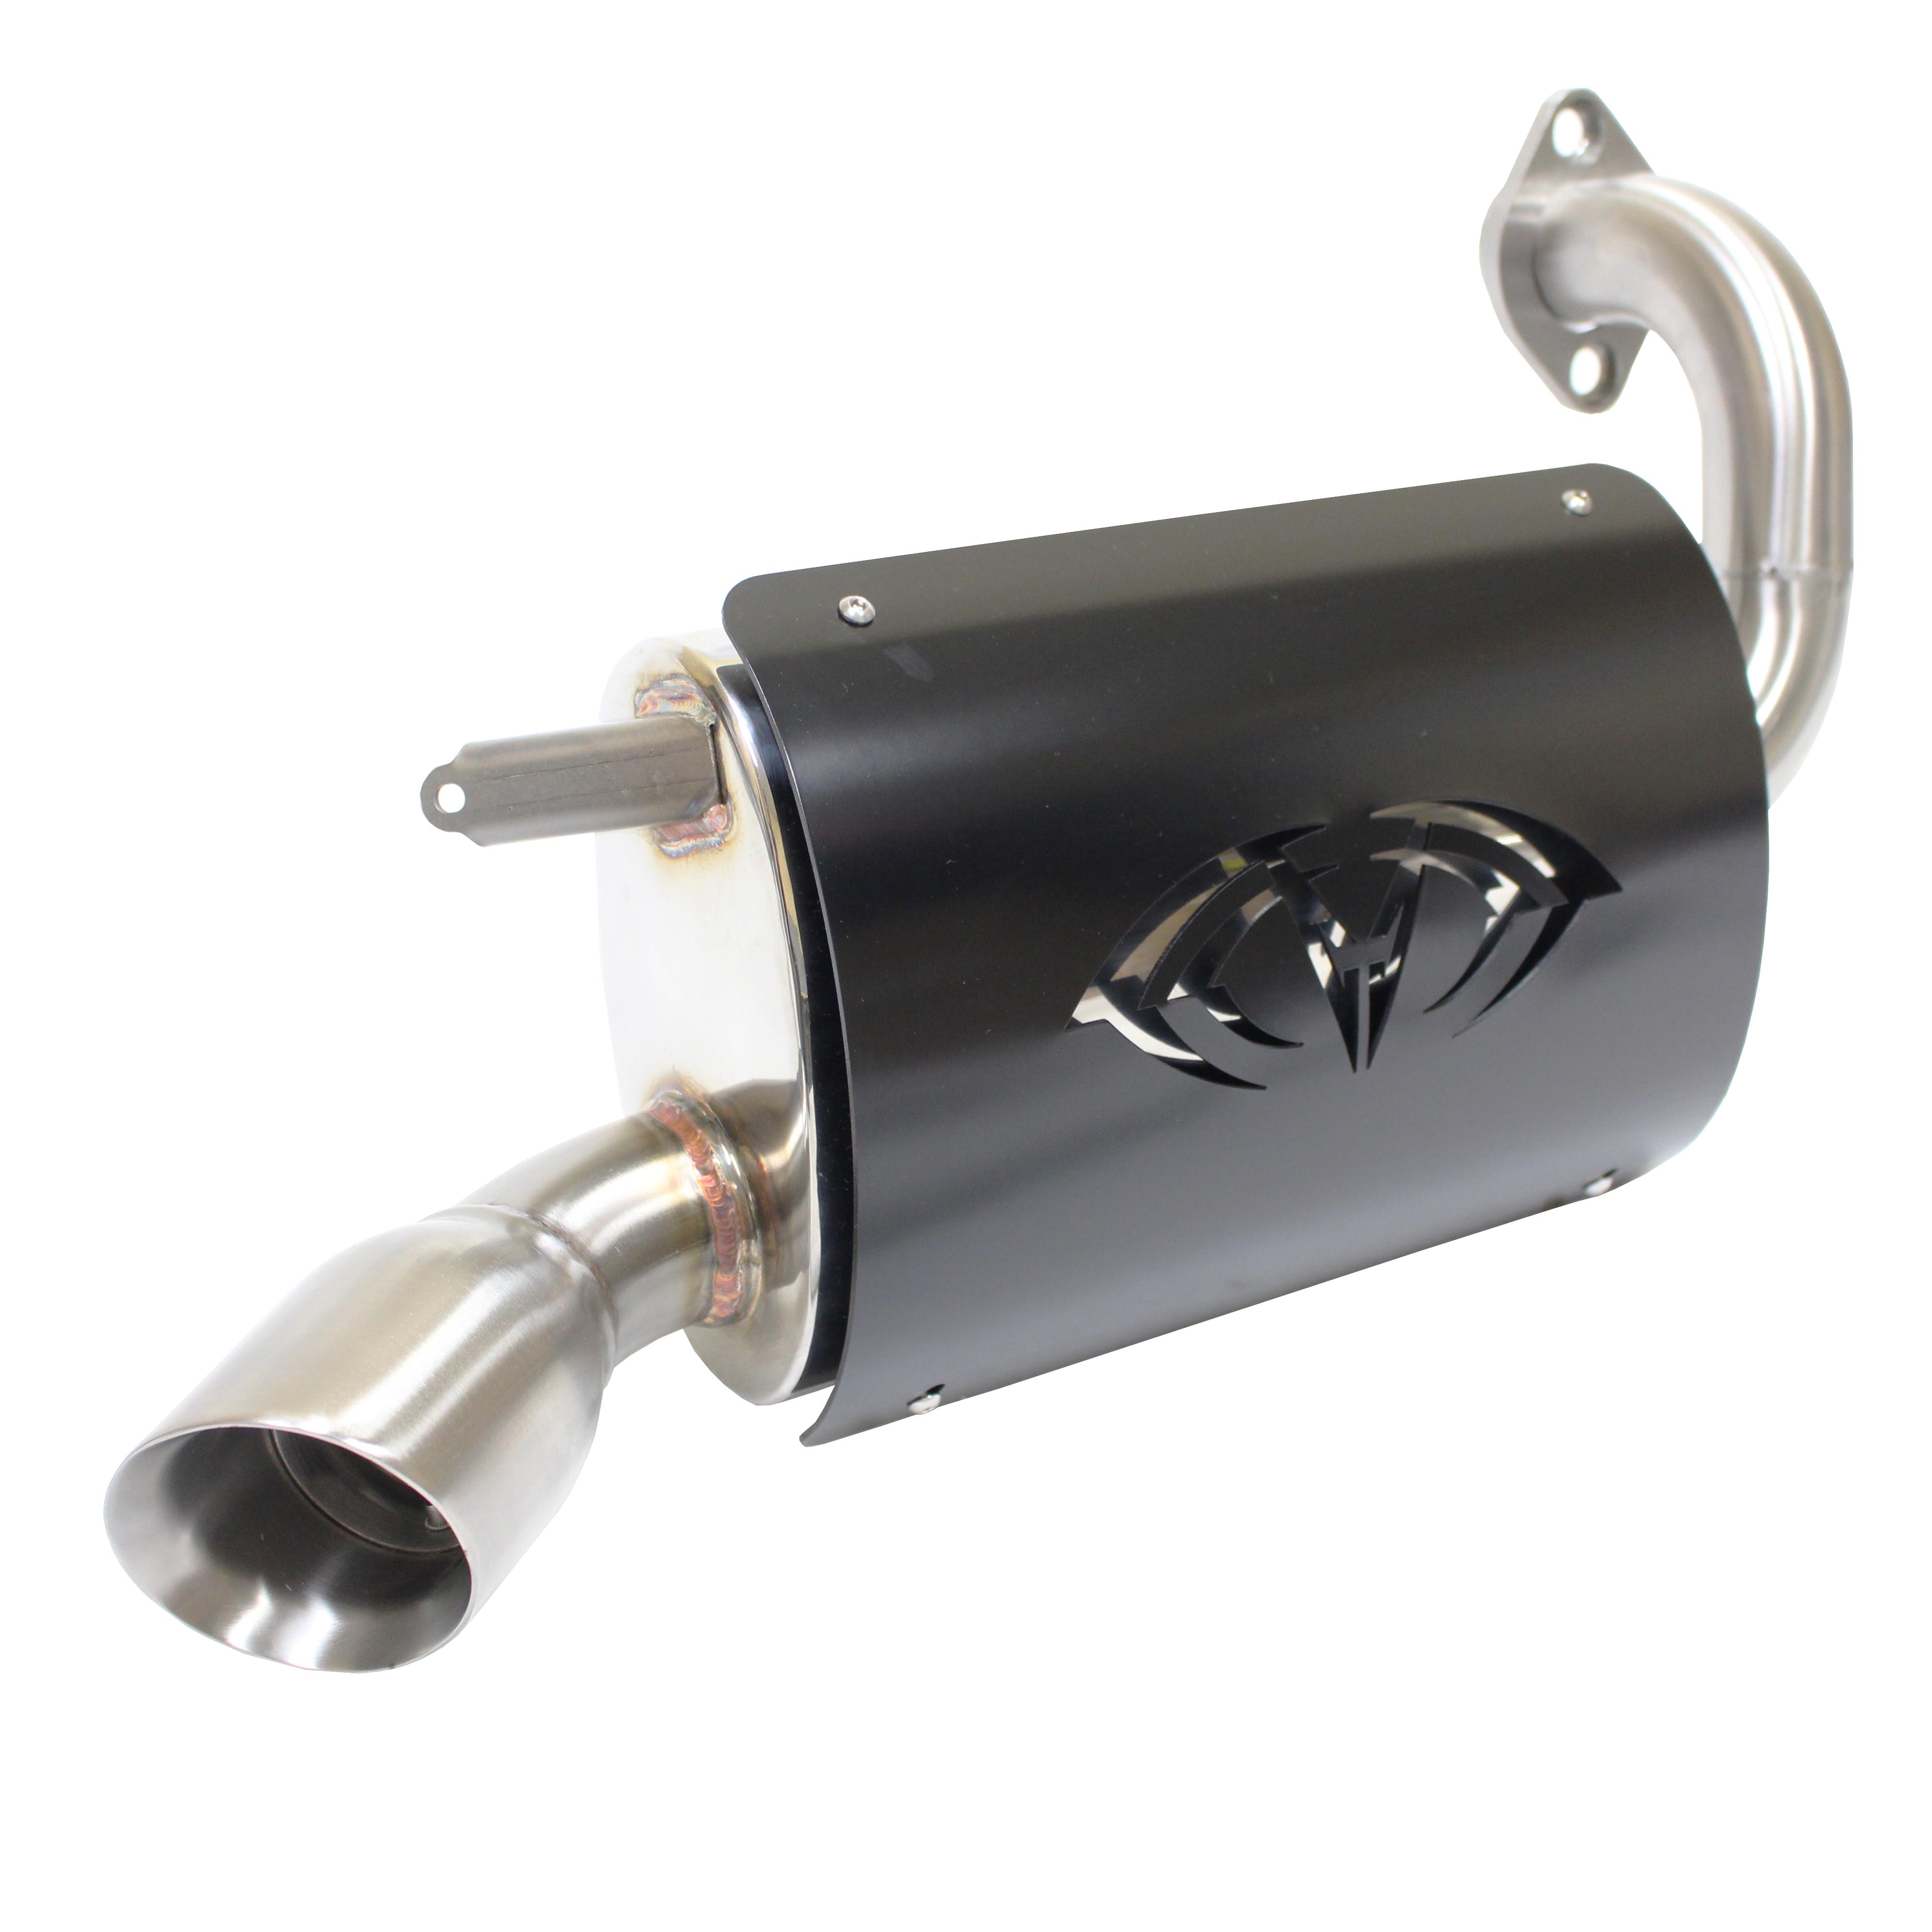 Slip-on exhausts, Page 5